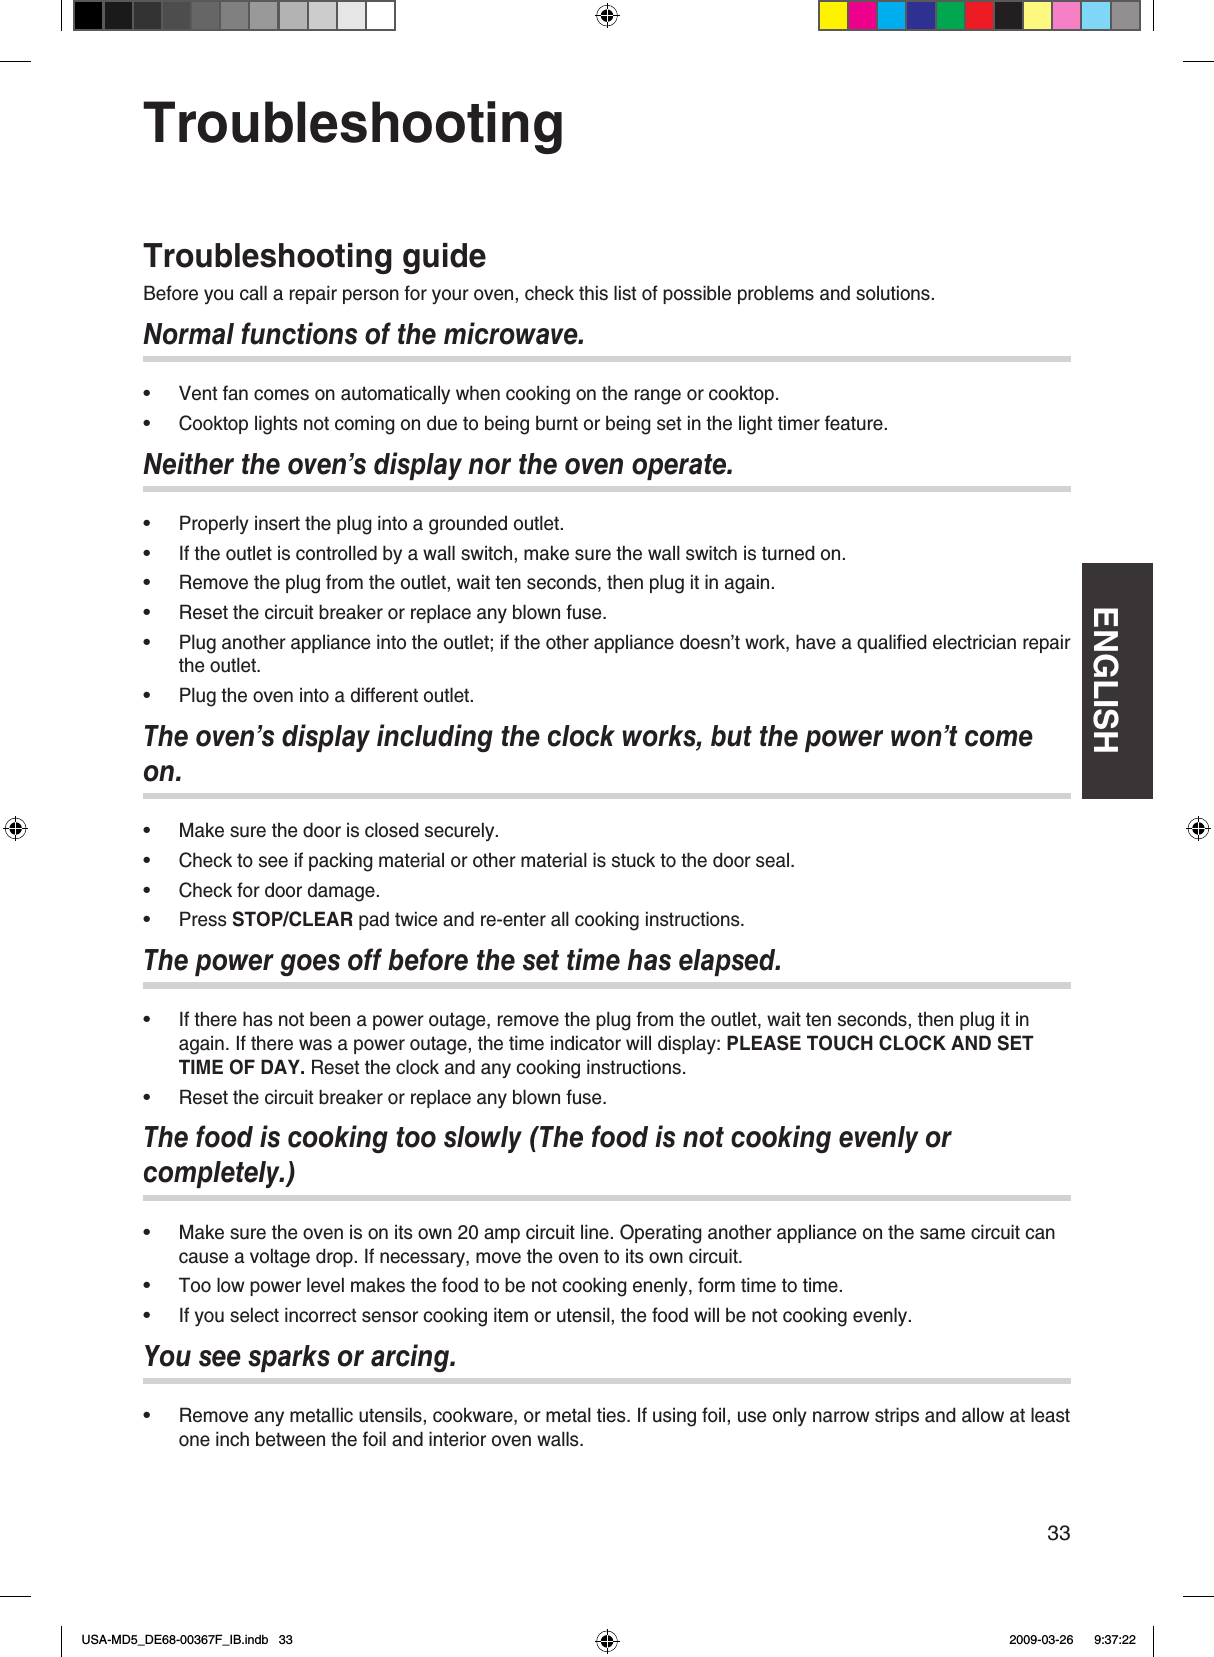 ENGLISH33TroubleshootingTroubleshooting guideBefore you call a repair person for your oven, check this list of possible problems and solutionsNormal functions of the microwave.Vent fan comes on automatically when cooking on the range or cooktop Cooktop lights not coming on due to being burnt or being set in the light timer featureNeither the oven’s display nor the oven operate.Properly insert the plug into a grounded outletIf the outlet is controlled by a wall switch, make sure the wall switch is turned onRemove the plug from the outlet, wait ten seconds, then plug it in againReset the circuit breaker or replace any blown fusePlug another appliance into the outlet; if the other appliance doesn’t work, have a qualied electrician repair the outletPlug the oven into a different outletThe oven’s display including the clock works, but the power won’t come on.Make sure the door is closed securelyCheck to see if packing material or other material is stuck to the door sealCheck for door damagePress STOP/CLEAR pad twice and re-enter all cooking instructionsThe power goes off before the set time has elapsed.If there has not been a power outage, remove the plug from the outlet, wait ten seconds, then plug it in again If there was a power outage, the time indicator will display: PLEASE TOUCH CLOCK AND SET TIME OF DAY. Reset the clock and any cooking instructionsReset the circuit breaker or replace any blown fuseThe food is cooking too slowly (The food is not cooking evenly or completely.)Make sure the oven is on its own 20 amp circuit line Operating another appliance on the same circuit can cause a voltage drop If necessary, move the oven to its own circuitToo low power level makes the food to be not cooking enenly, form time to timeIf you select incorrect sensor cooking item or utensil, the food will be not cooking evenlyYou see sparks or arcing.Remove any metallic utensils, cookware, or metal ties If using foil, use only narrow strips and allow at least one inch between the foil and interior oven walls••••••••••••••••••USA-MD5_DE68-00367F_IB.indb   33 2009-03-26    9:37:22